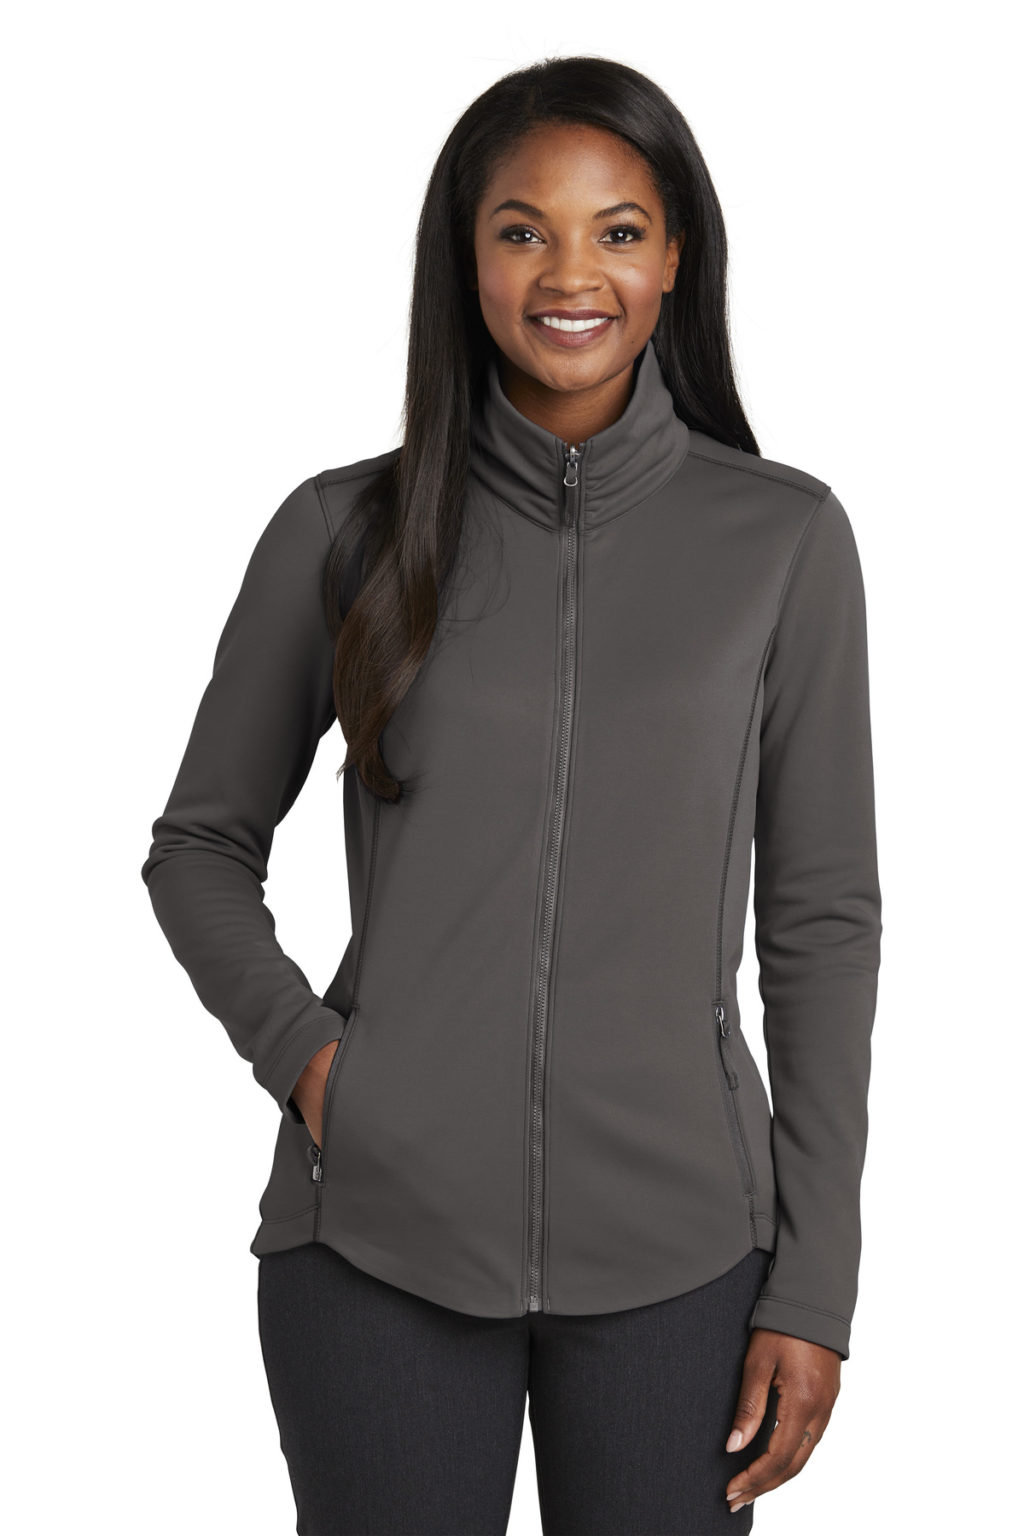 Ladies Smooth Fleece Jacket by Port Authority #L904 | Central Uniforms